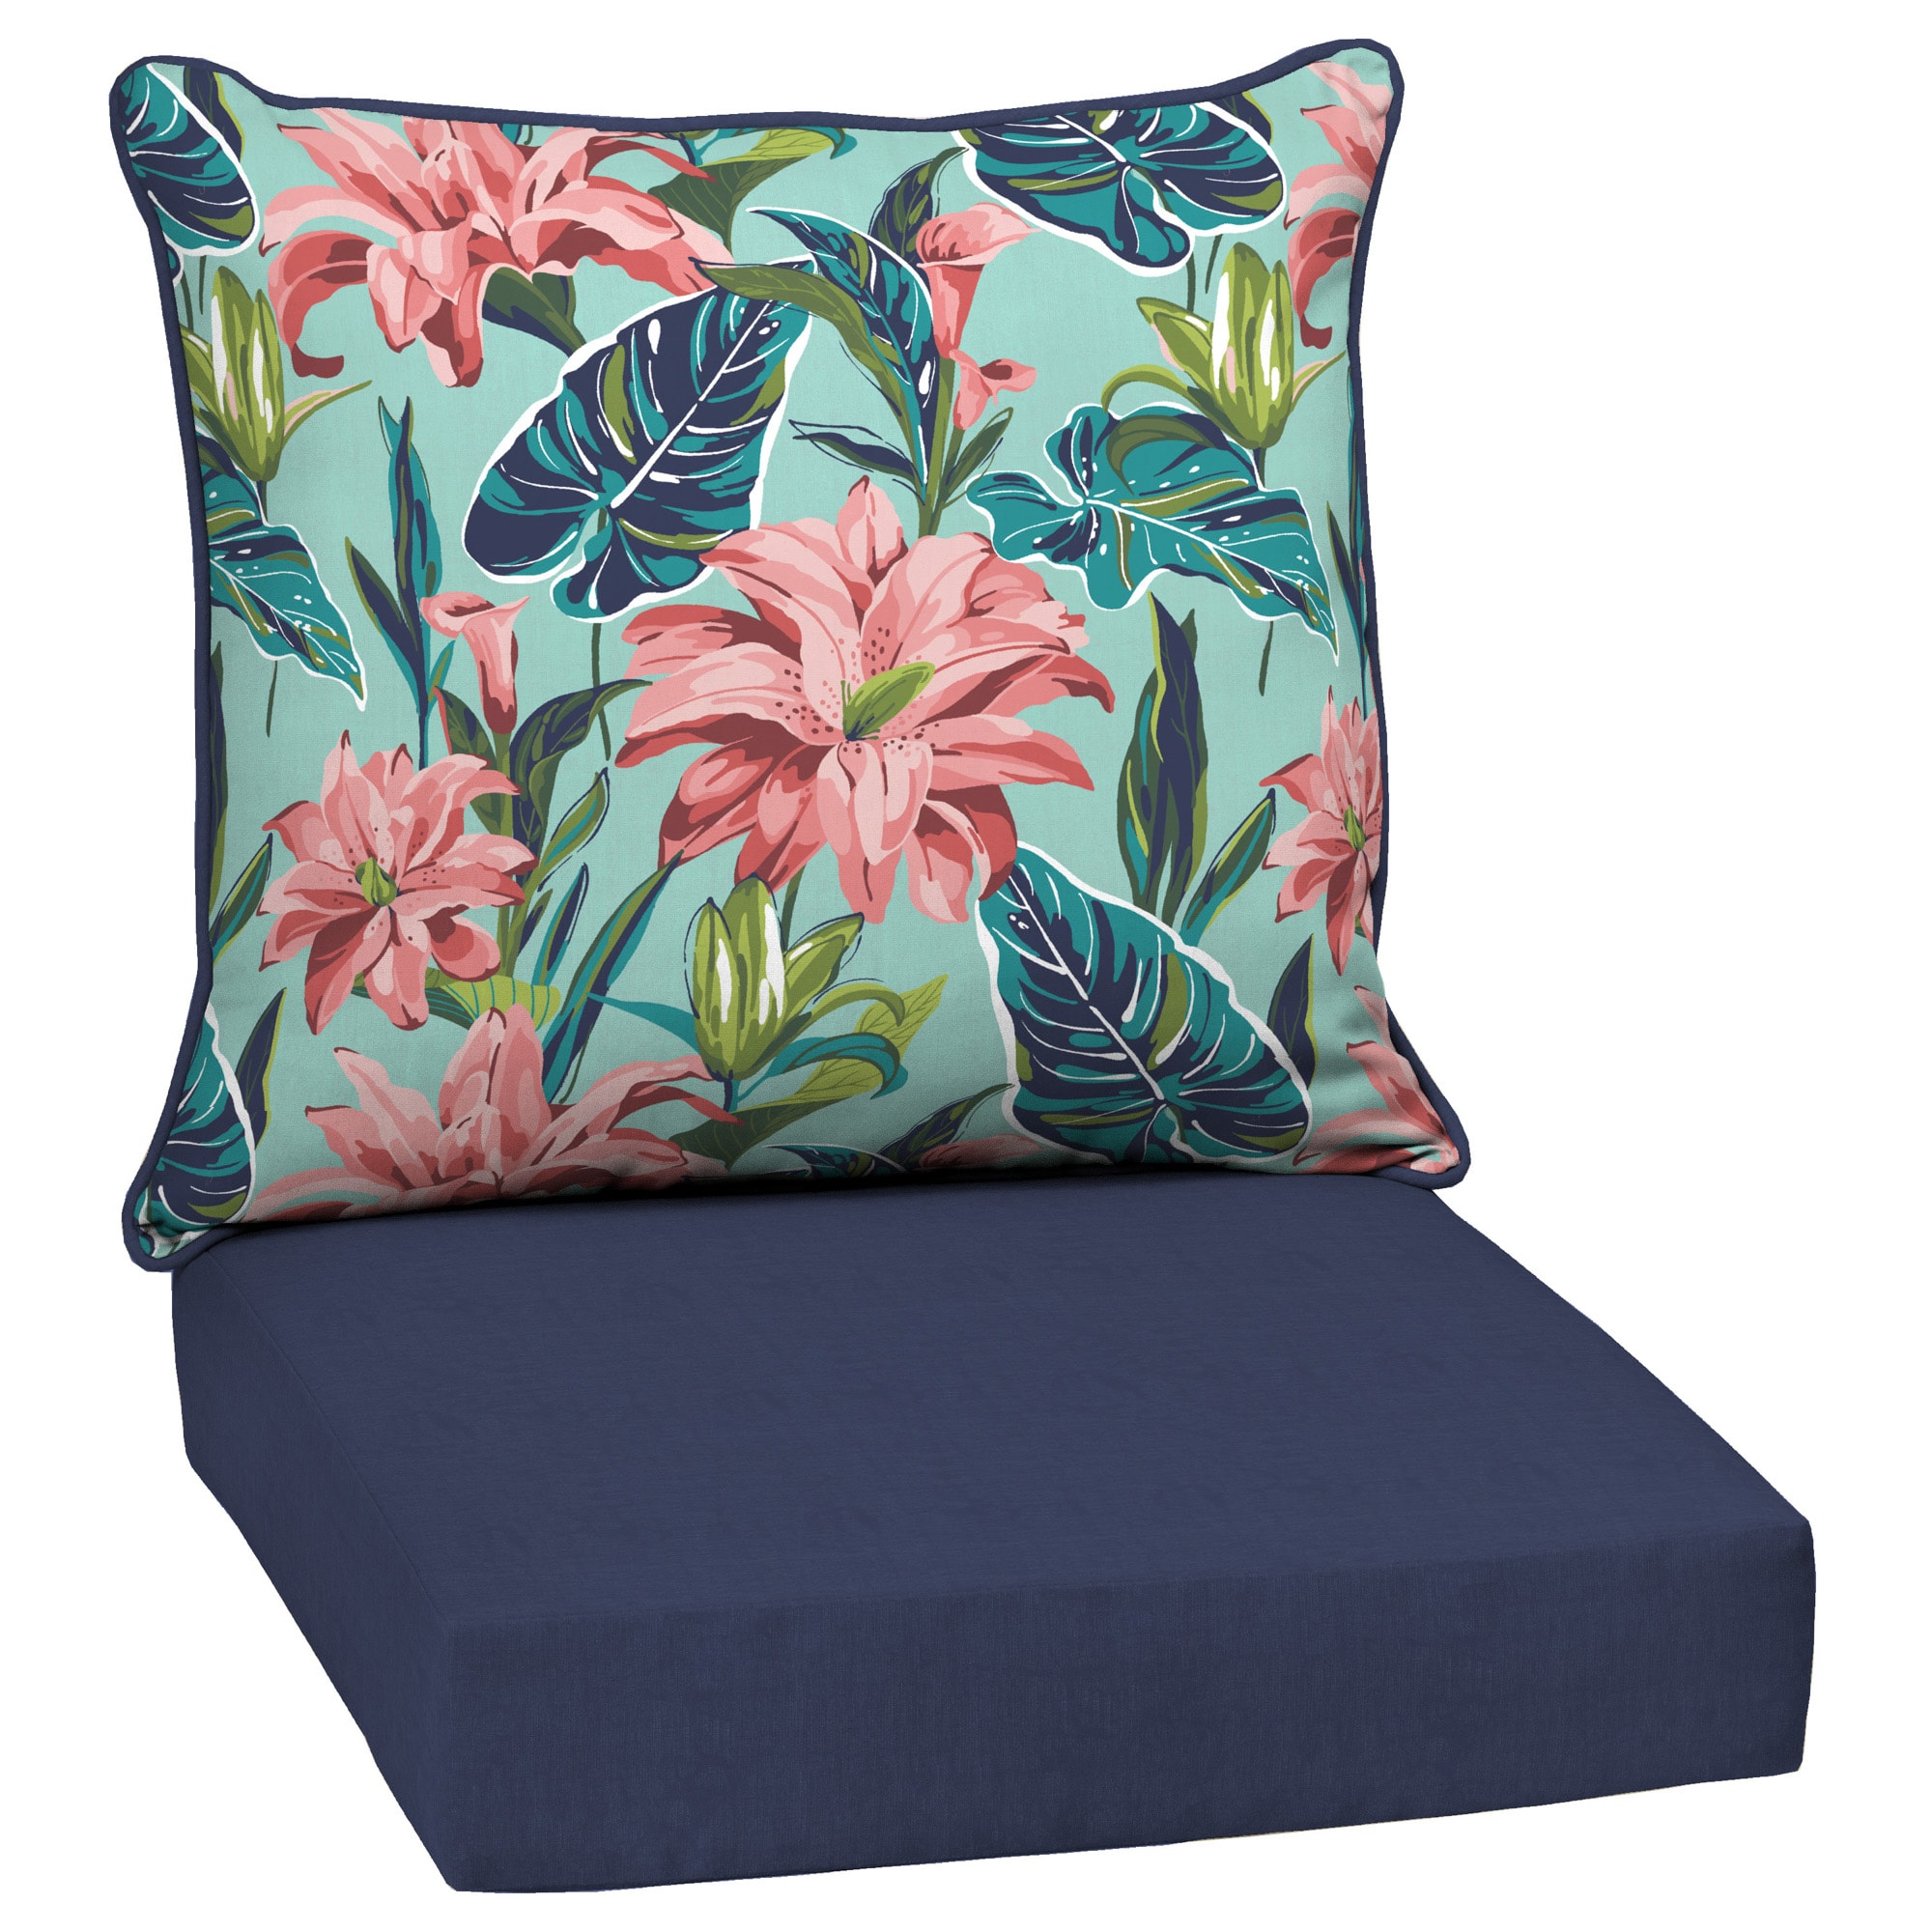 ARTPLAN Outdoor Cushion Thick Deep Seat Pillow Back for Wicker Chair, 24 in. x 24 in. x 6 in., Square Floral in Blue White